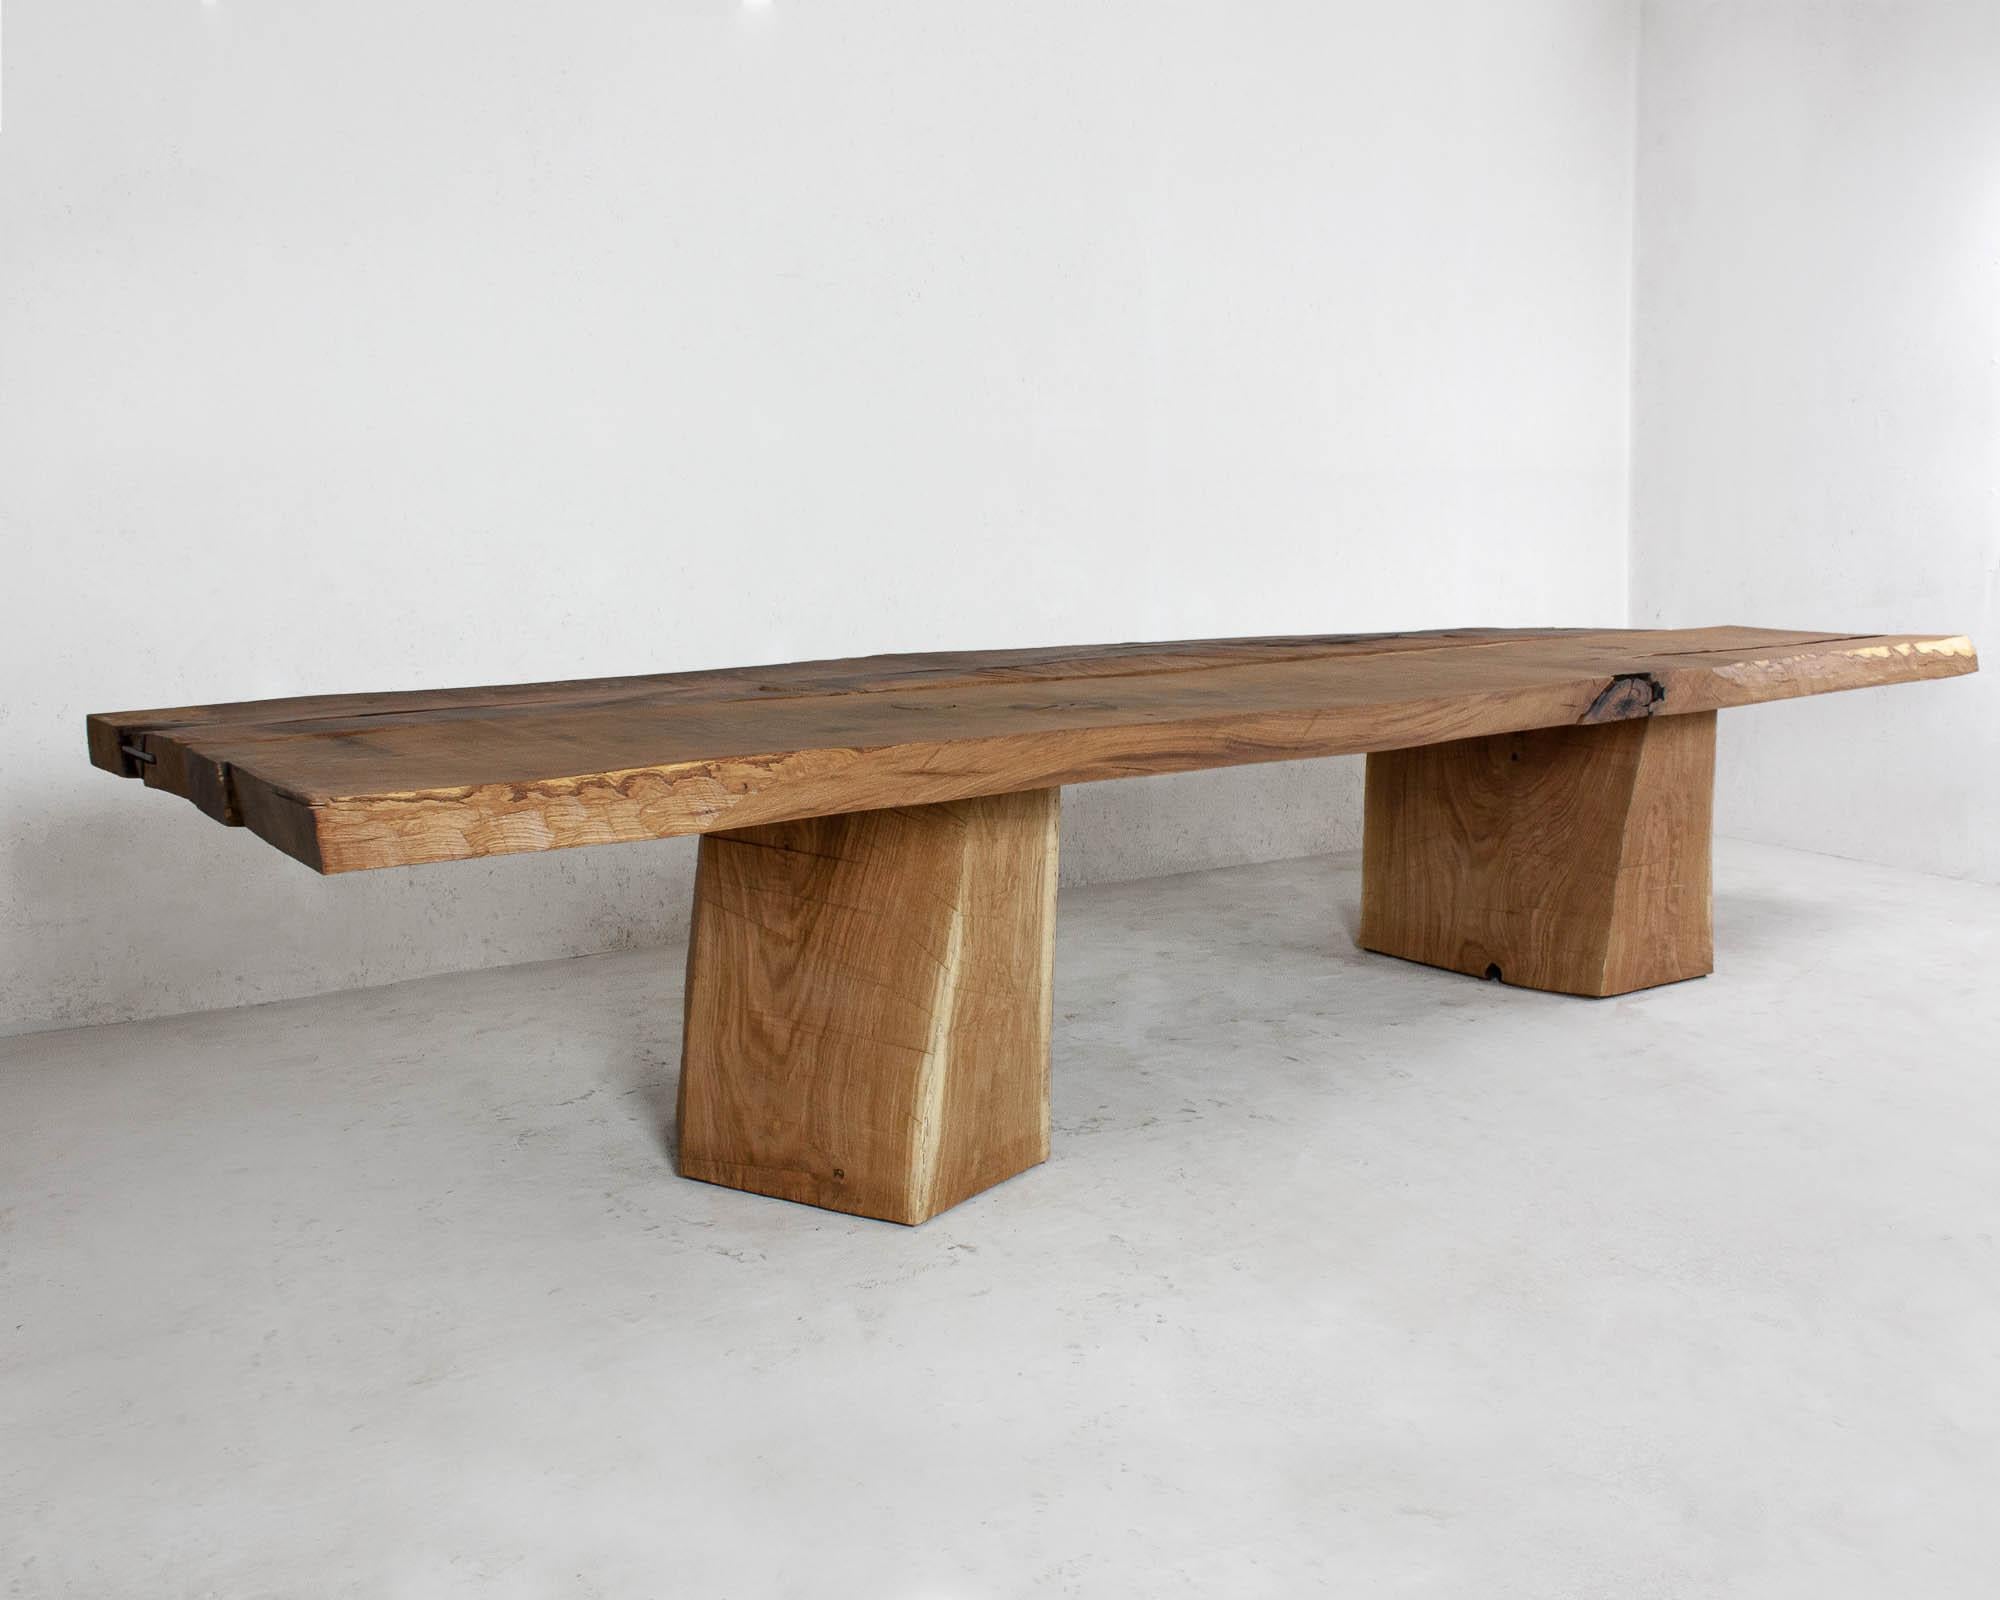 Massive dining table made of solid oak (+ linseed oil)
(Outdoor use OK)

Custom size: 11'L x 44